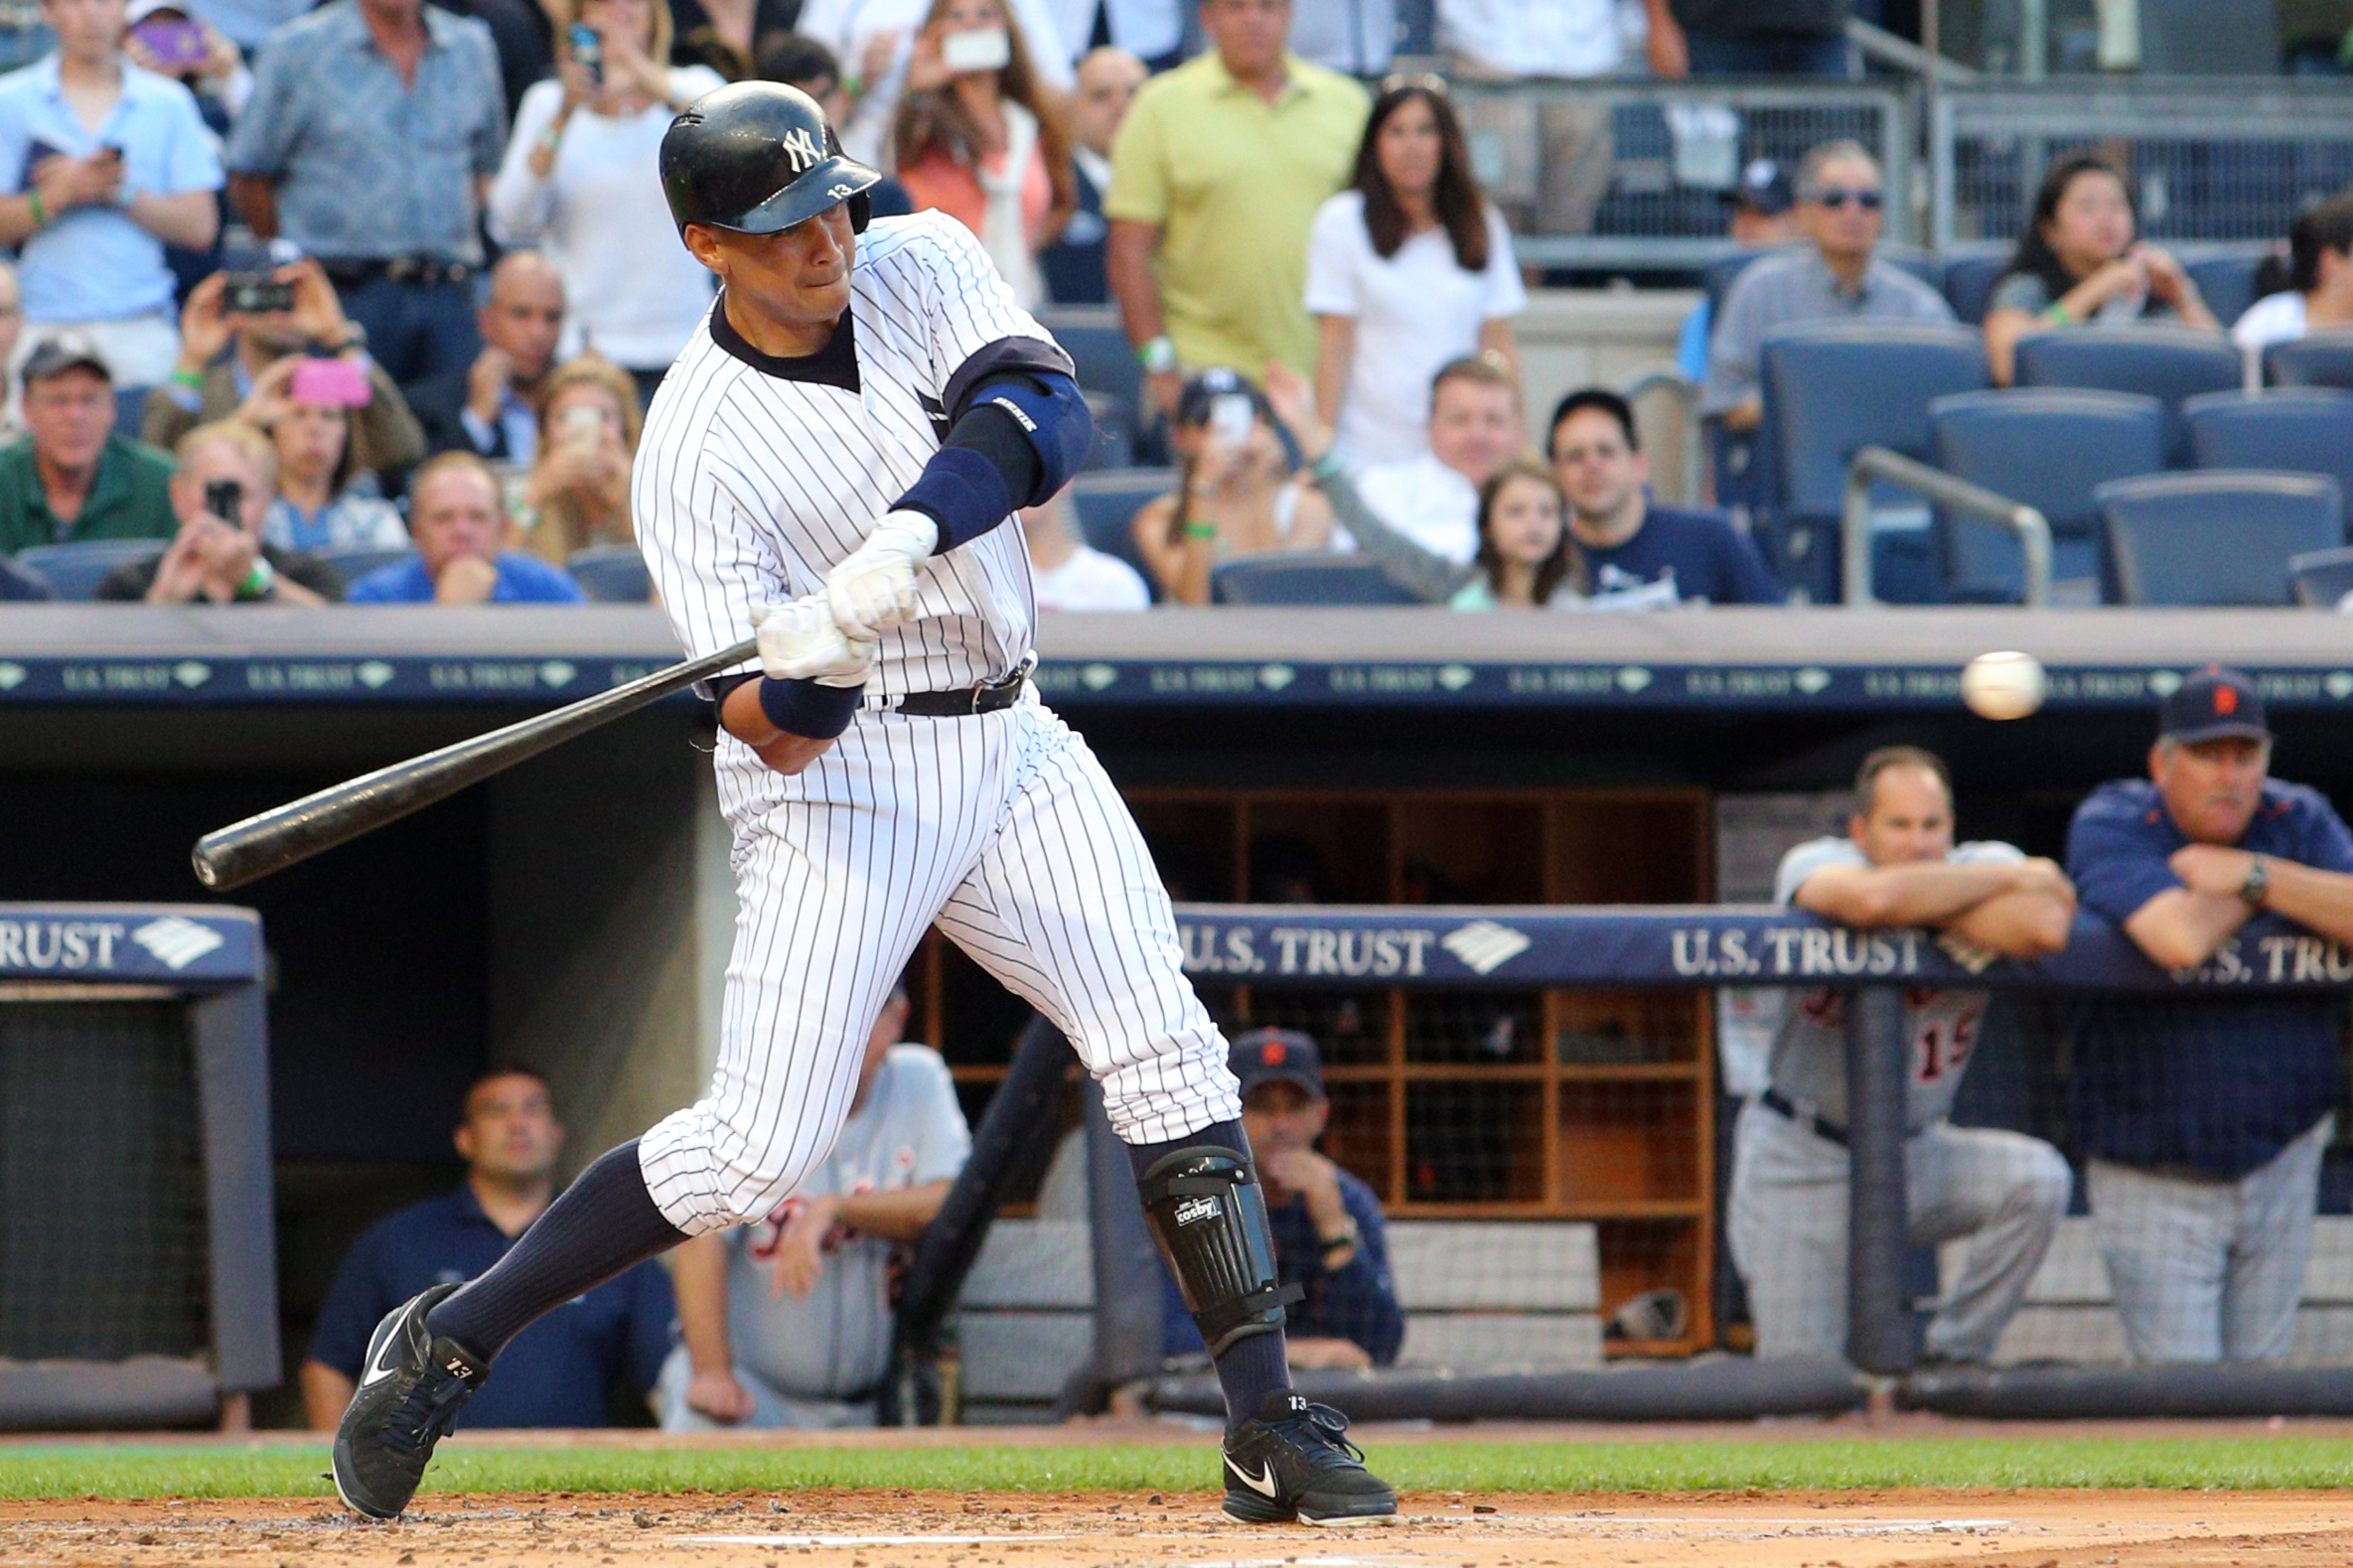 Alex Rodriguez's 3,000th hit comes on a home run against Tigers